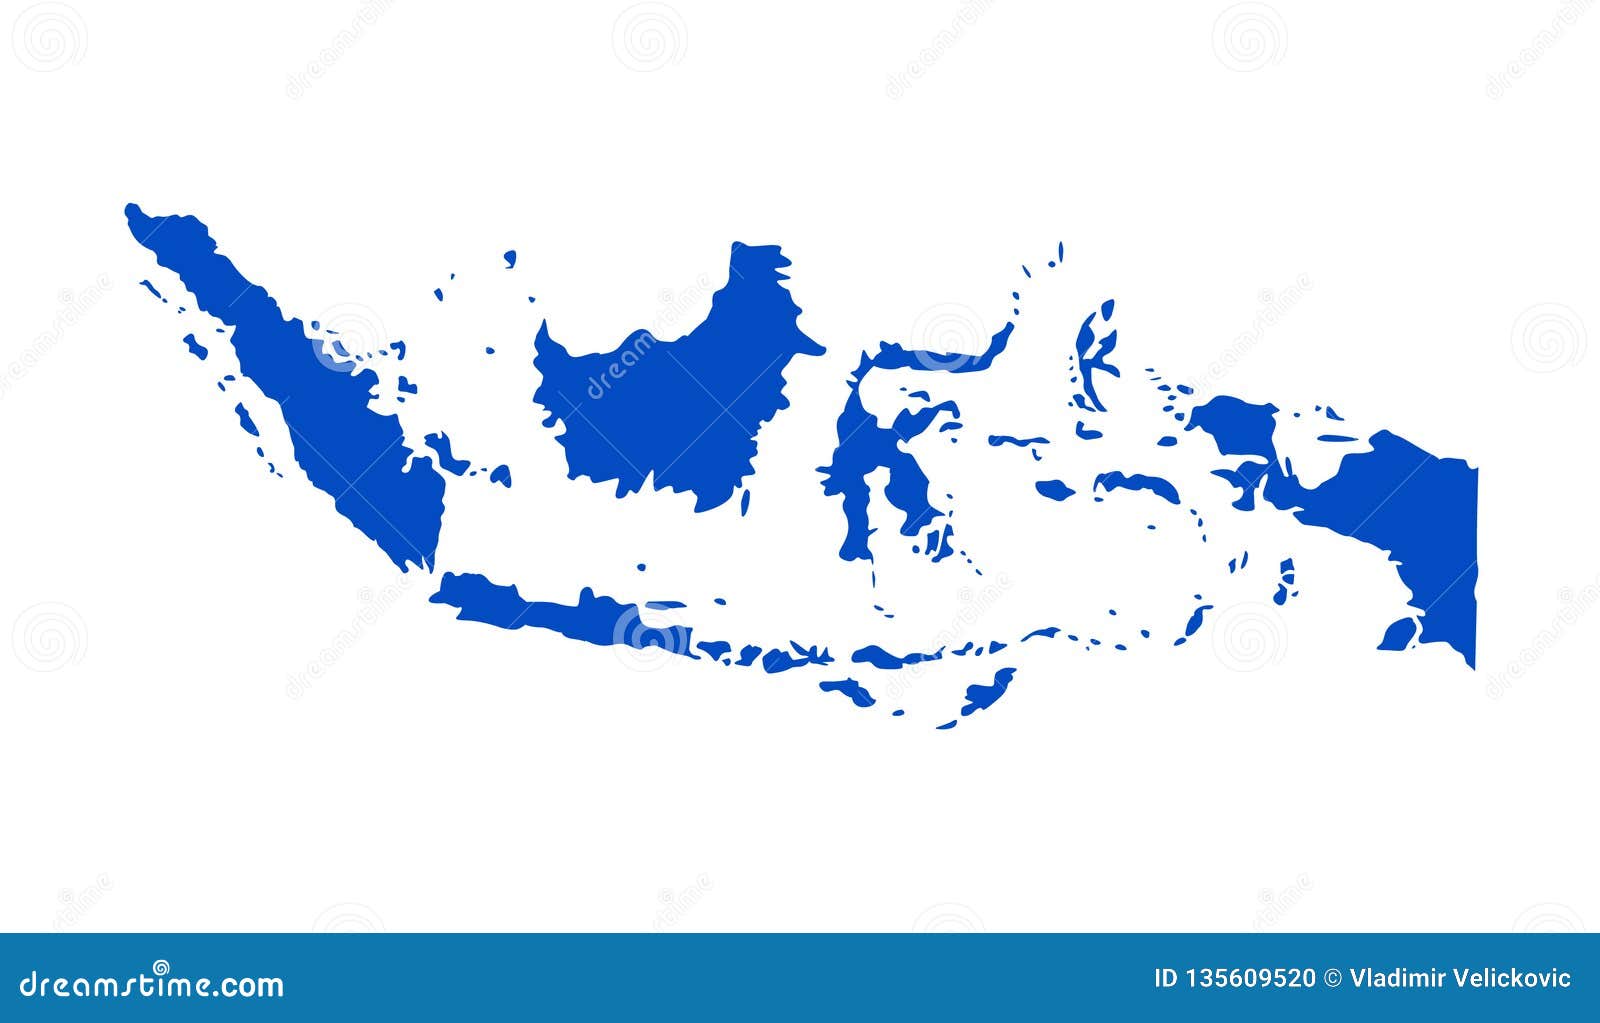 indonesia map - unitary state of the republic of indonesia